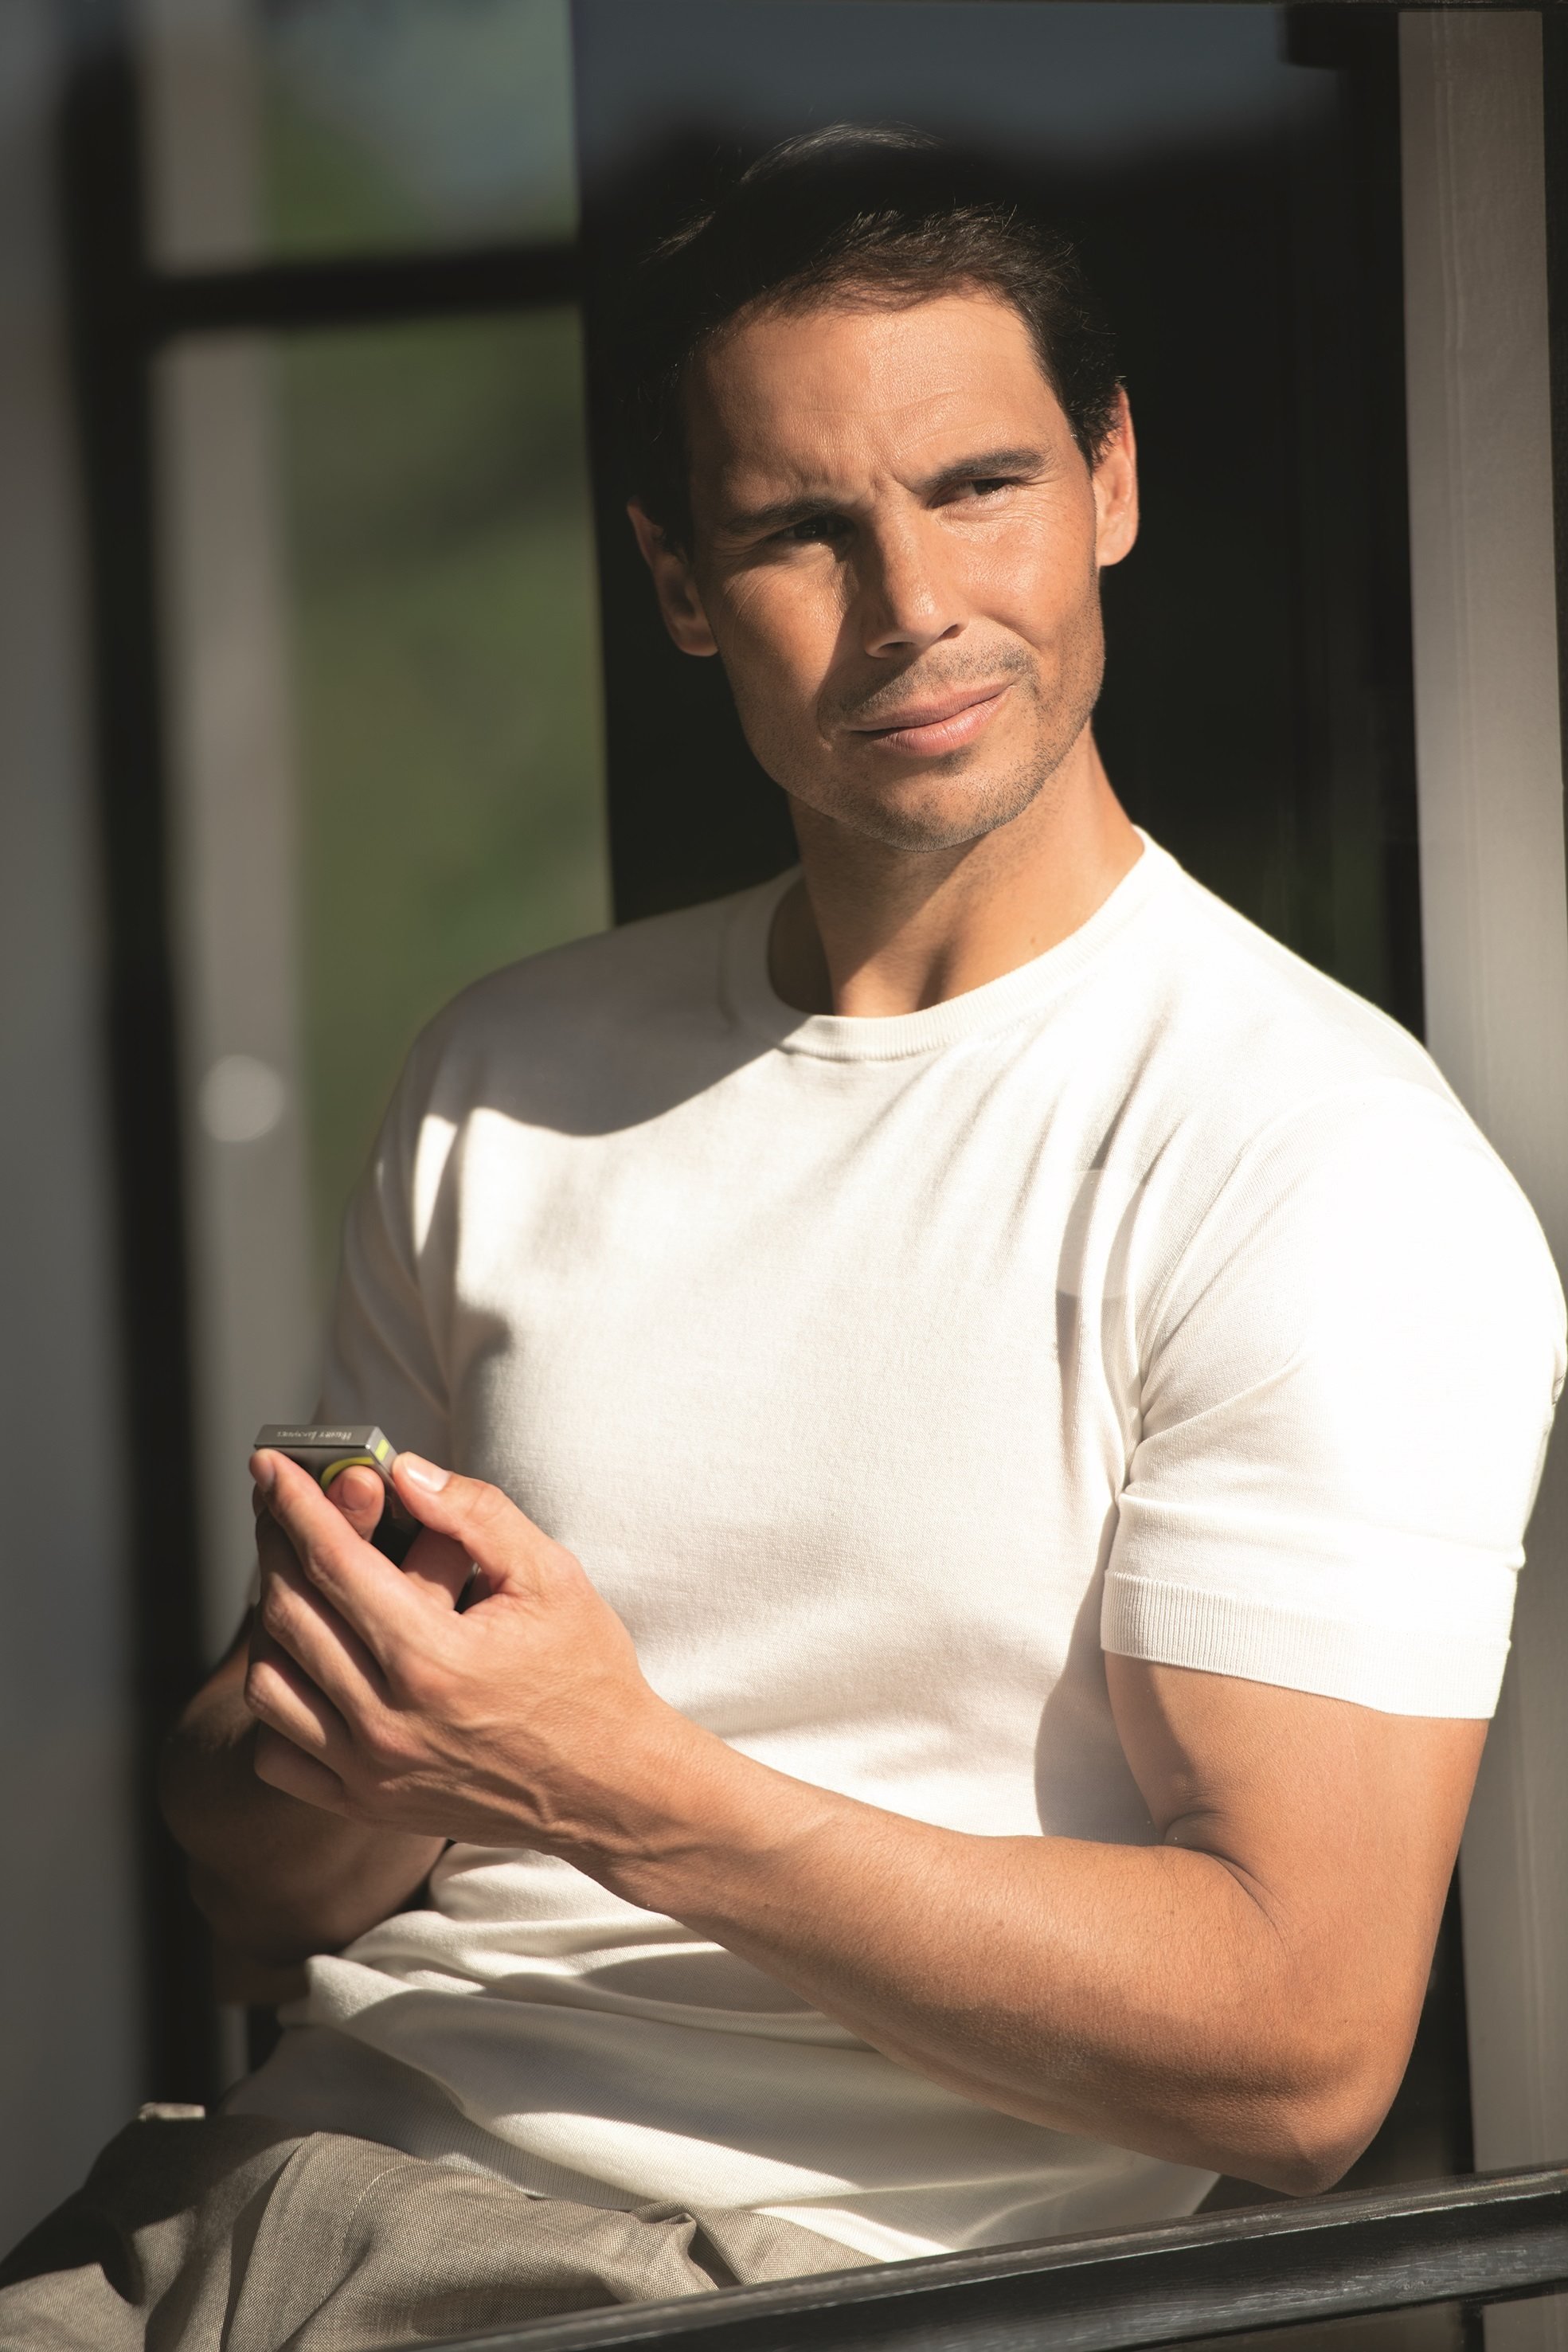 Tennis legend Rafael Nadal has collaborated with haute perfumerie house Henry Jacques on a collection of fragrances called In All Intimacy, along with a special edition of the house’s innovative Clic-Clac carrying case. Photo: Handout